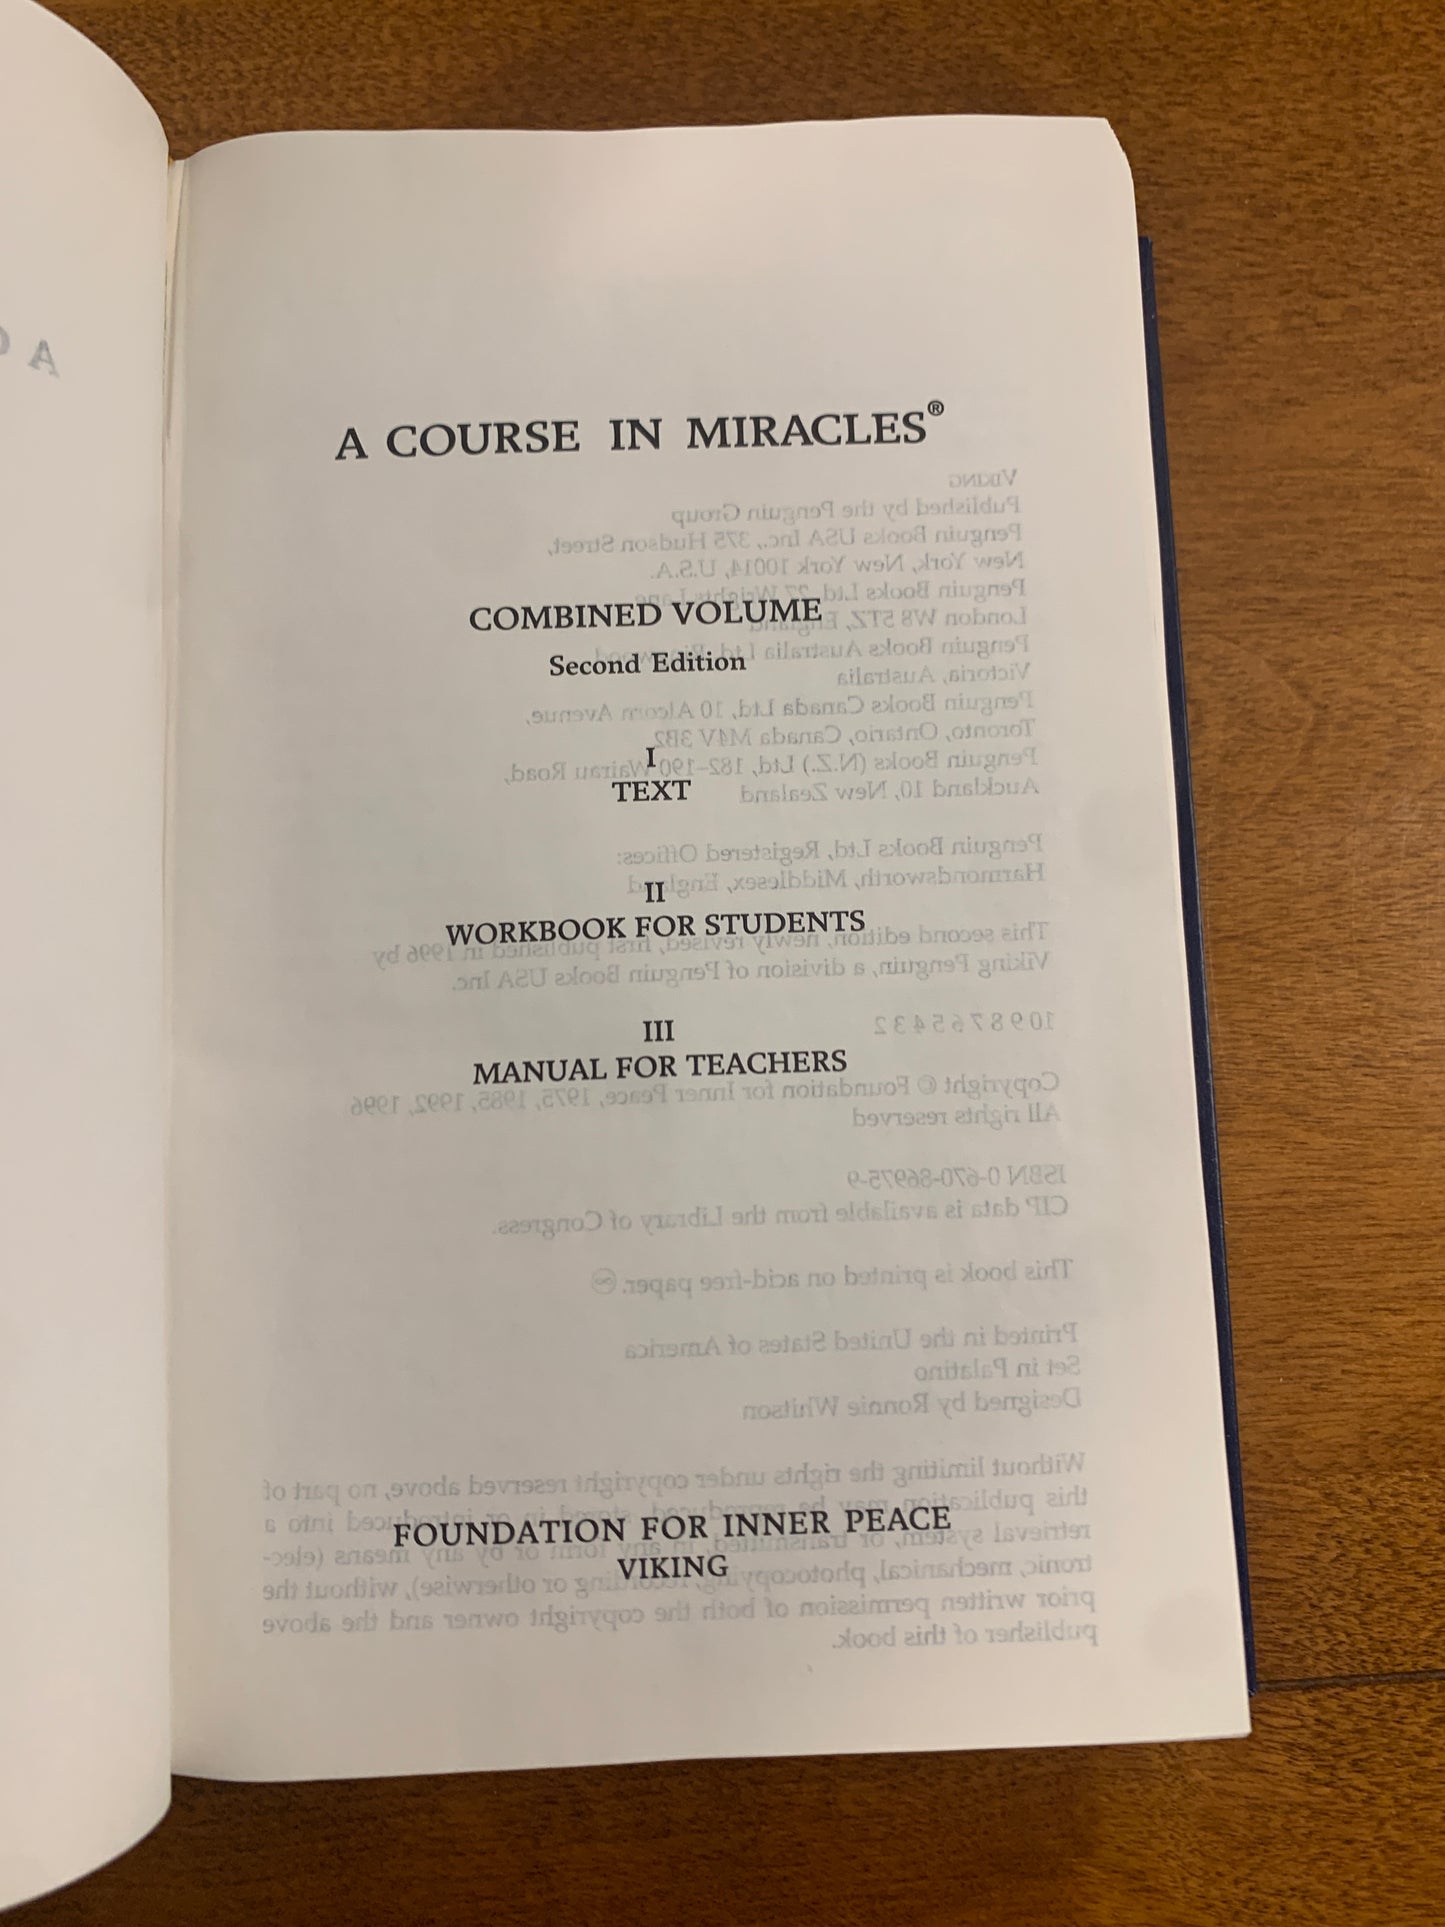 A Course in Miracles: Workbook for Students, Manual for Teachers 1996